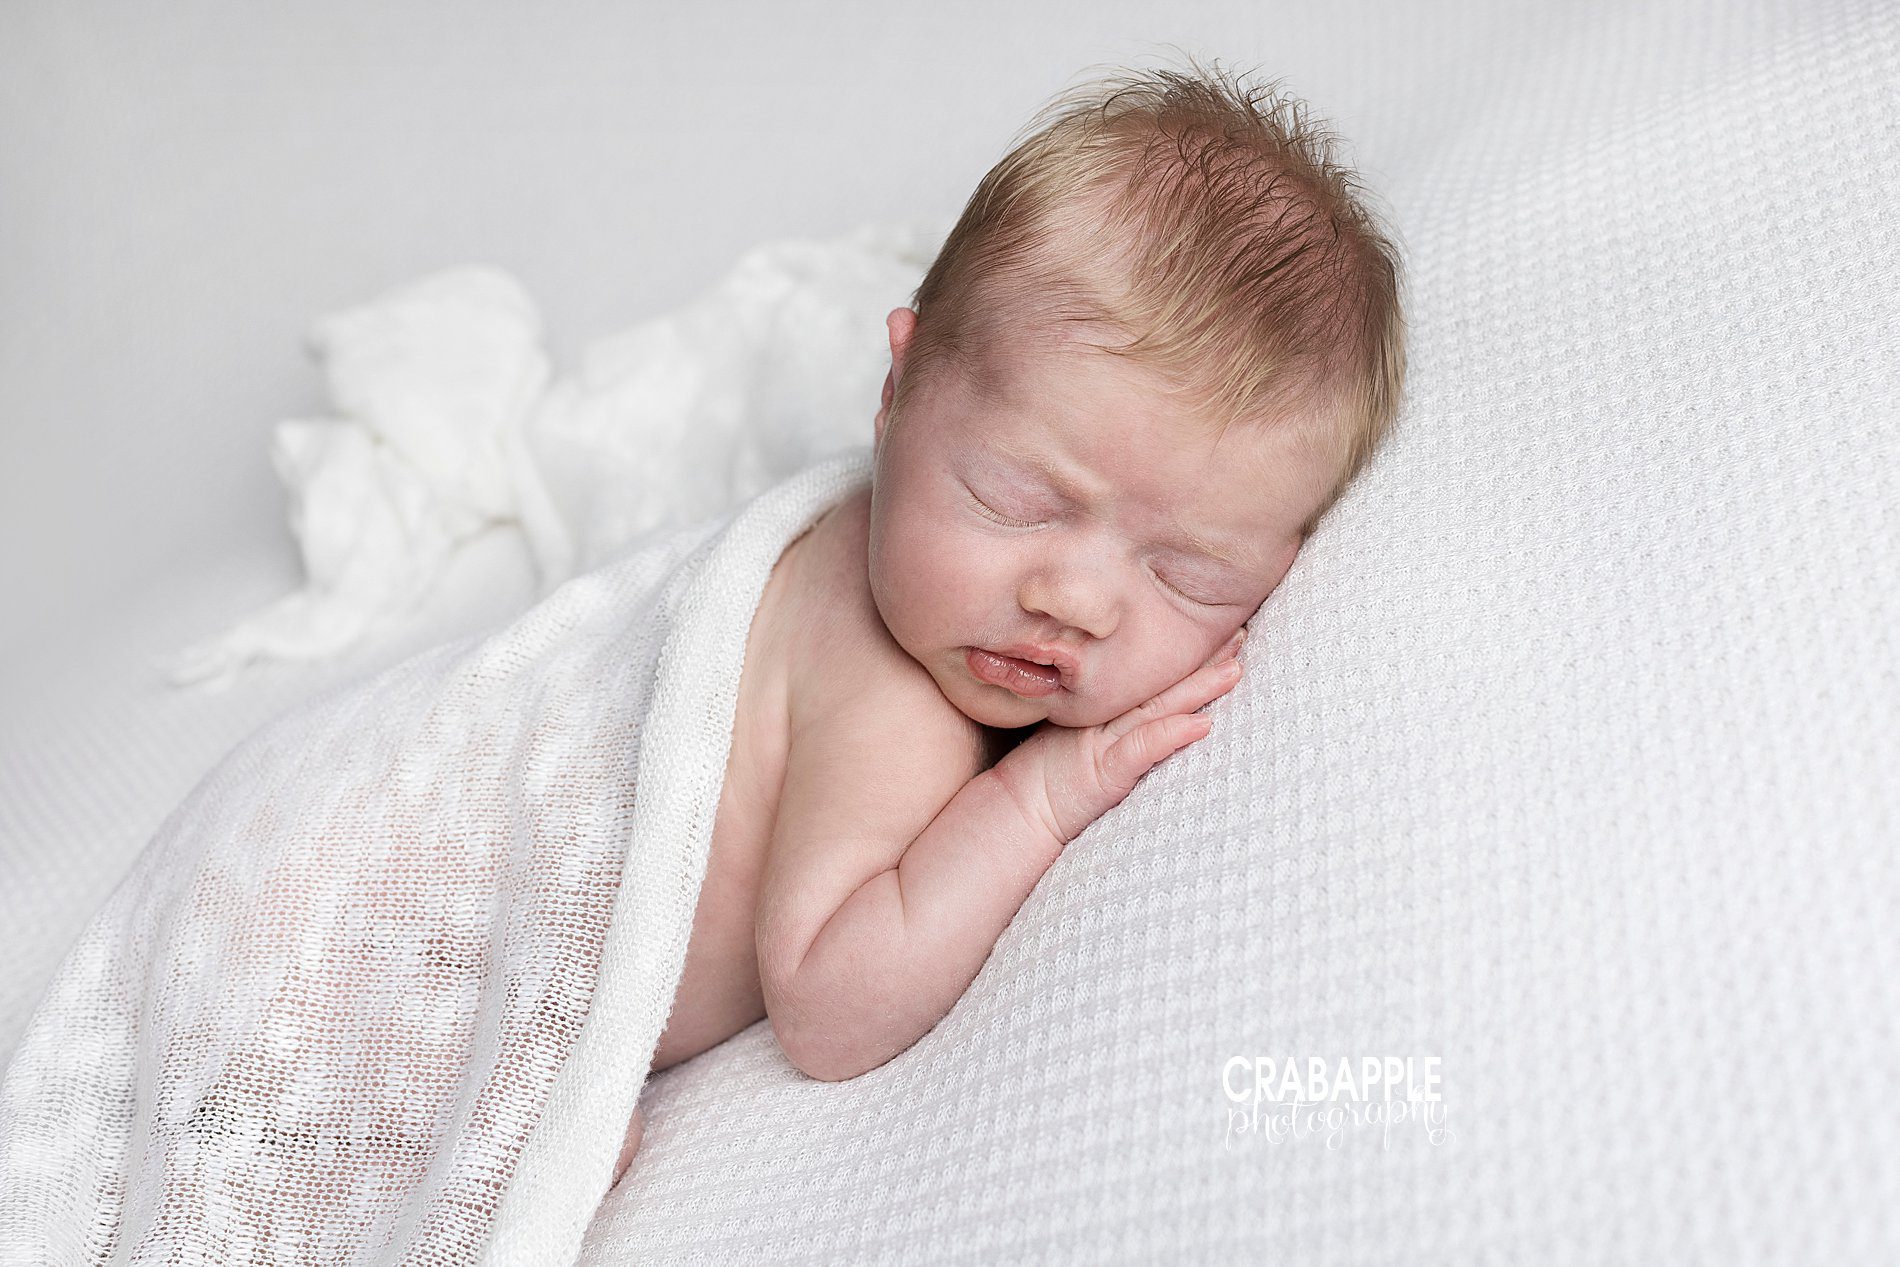 Newborn baby girl photos using all white blankets and swaddles. Clean and simple baby portrait ideas.